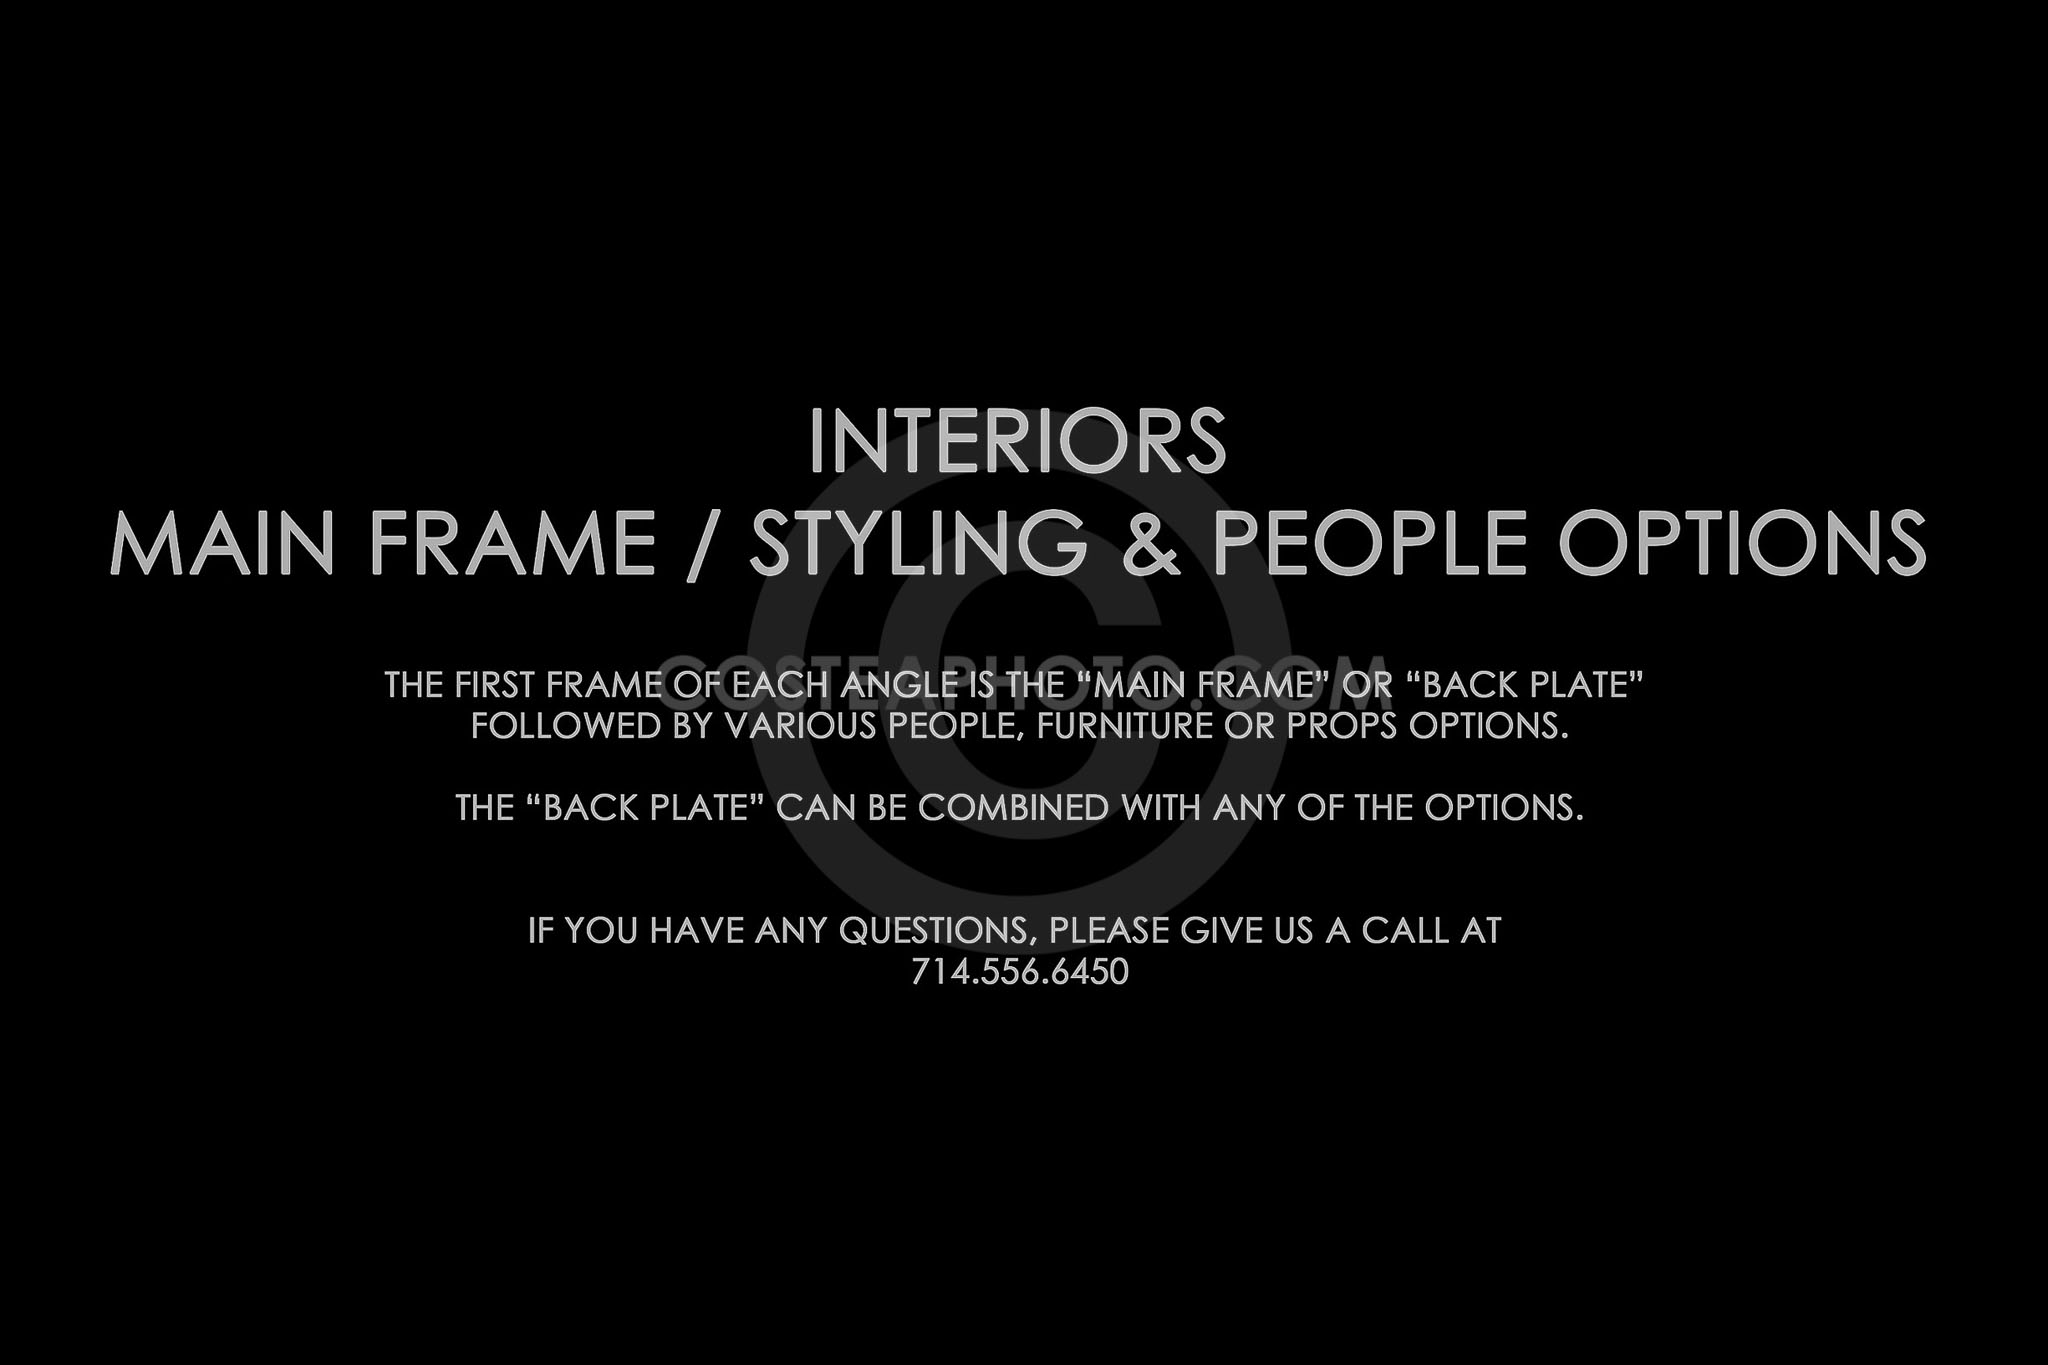 (002) TITLE PAGE - INTERIORS MAIN AND OPTIONS